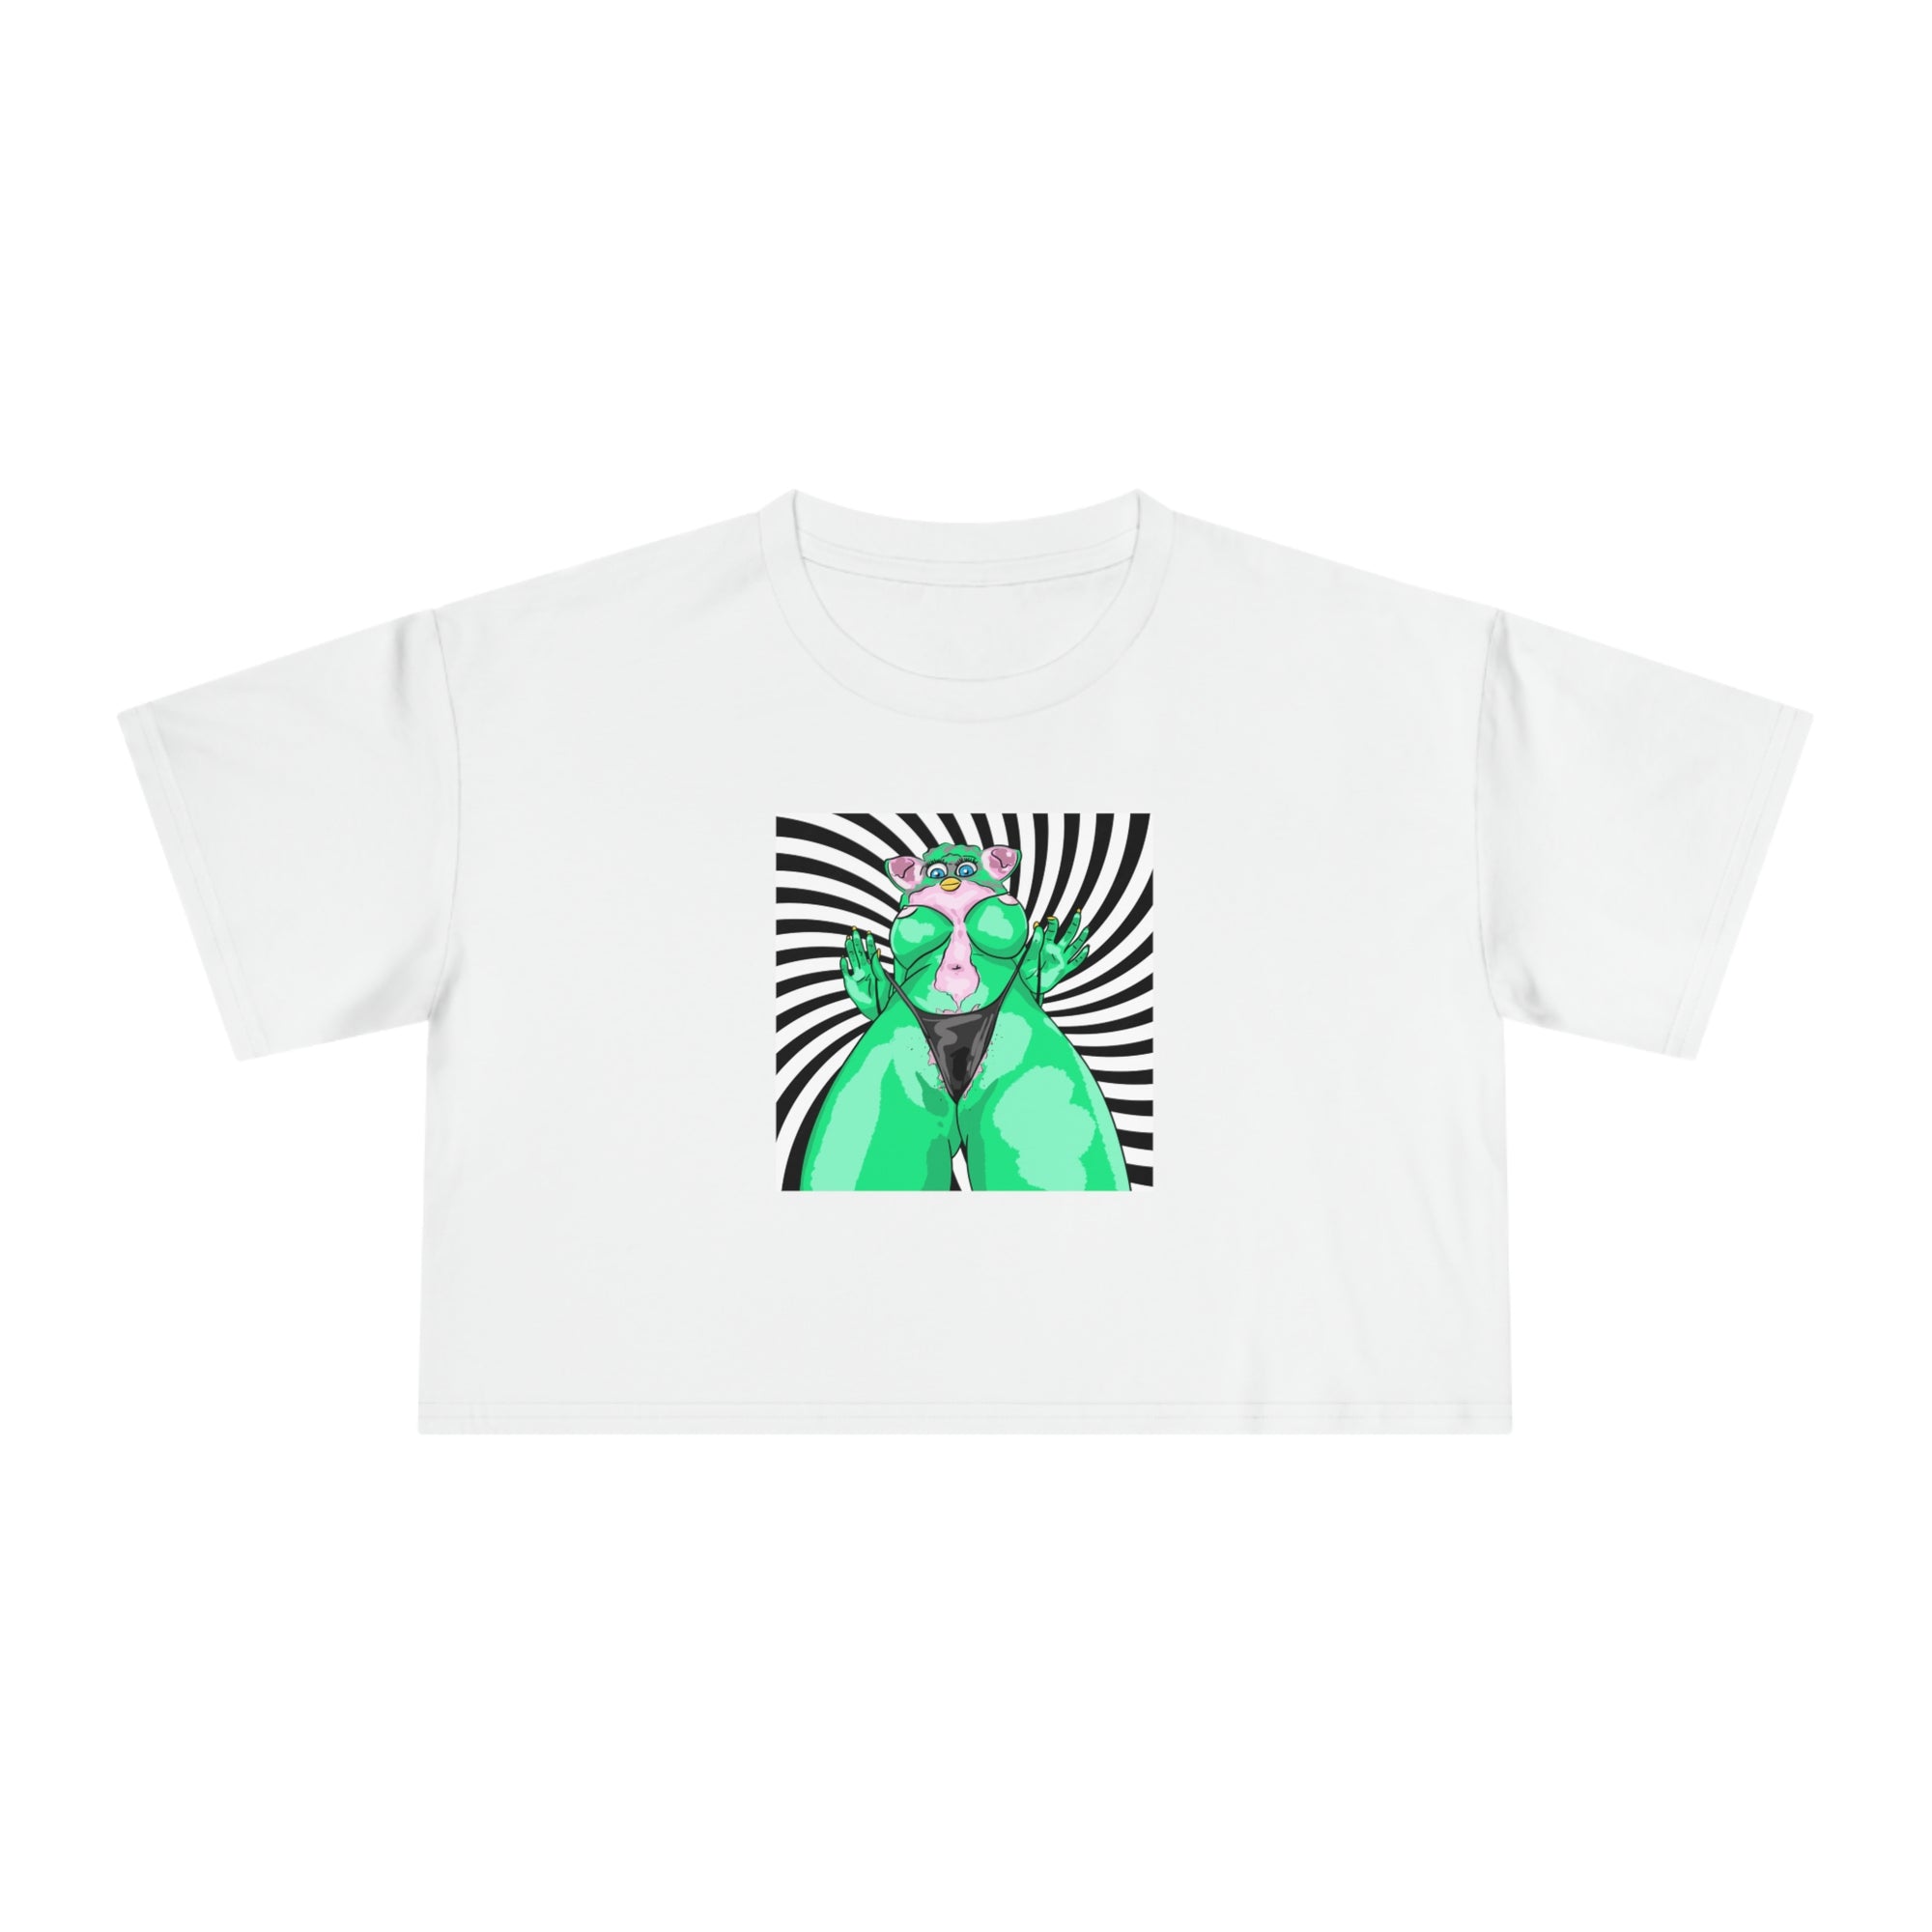 GREEN OUT - Crop Tee